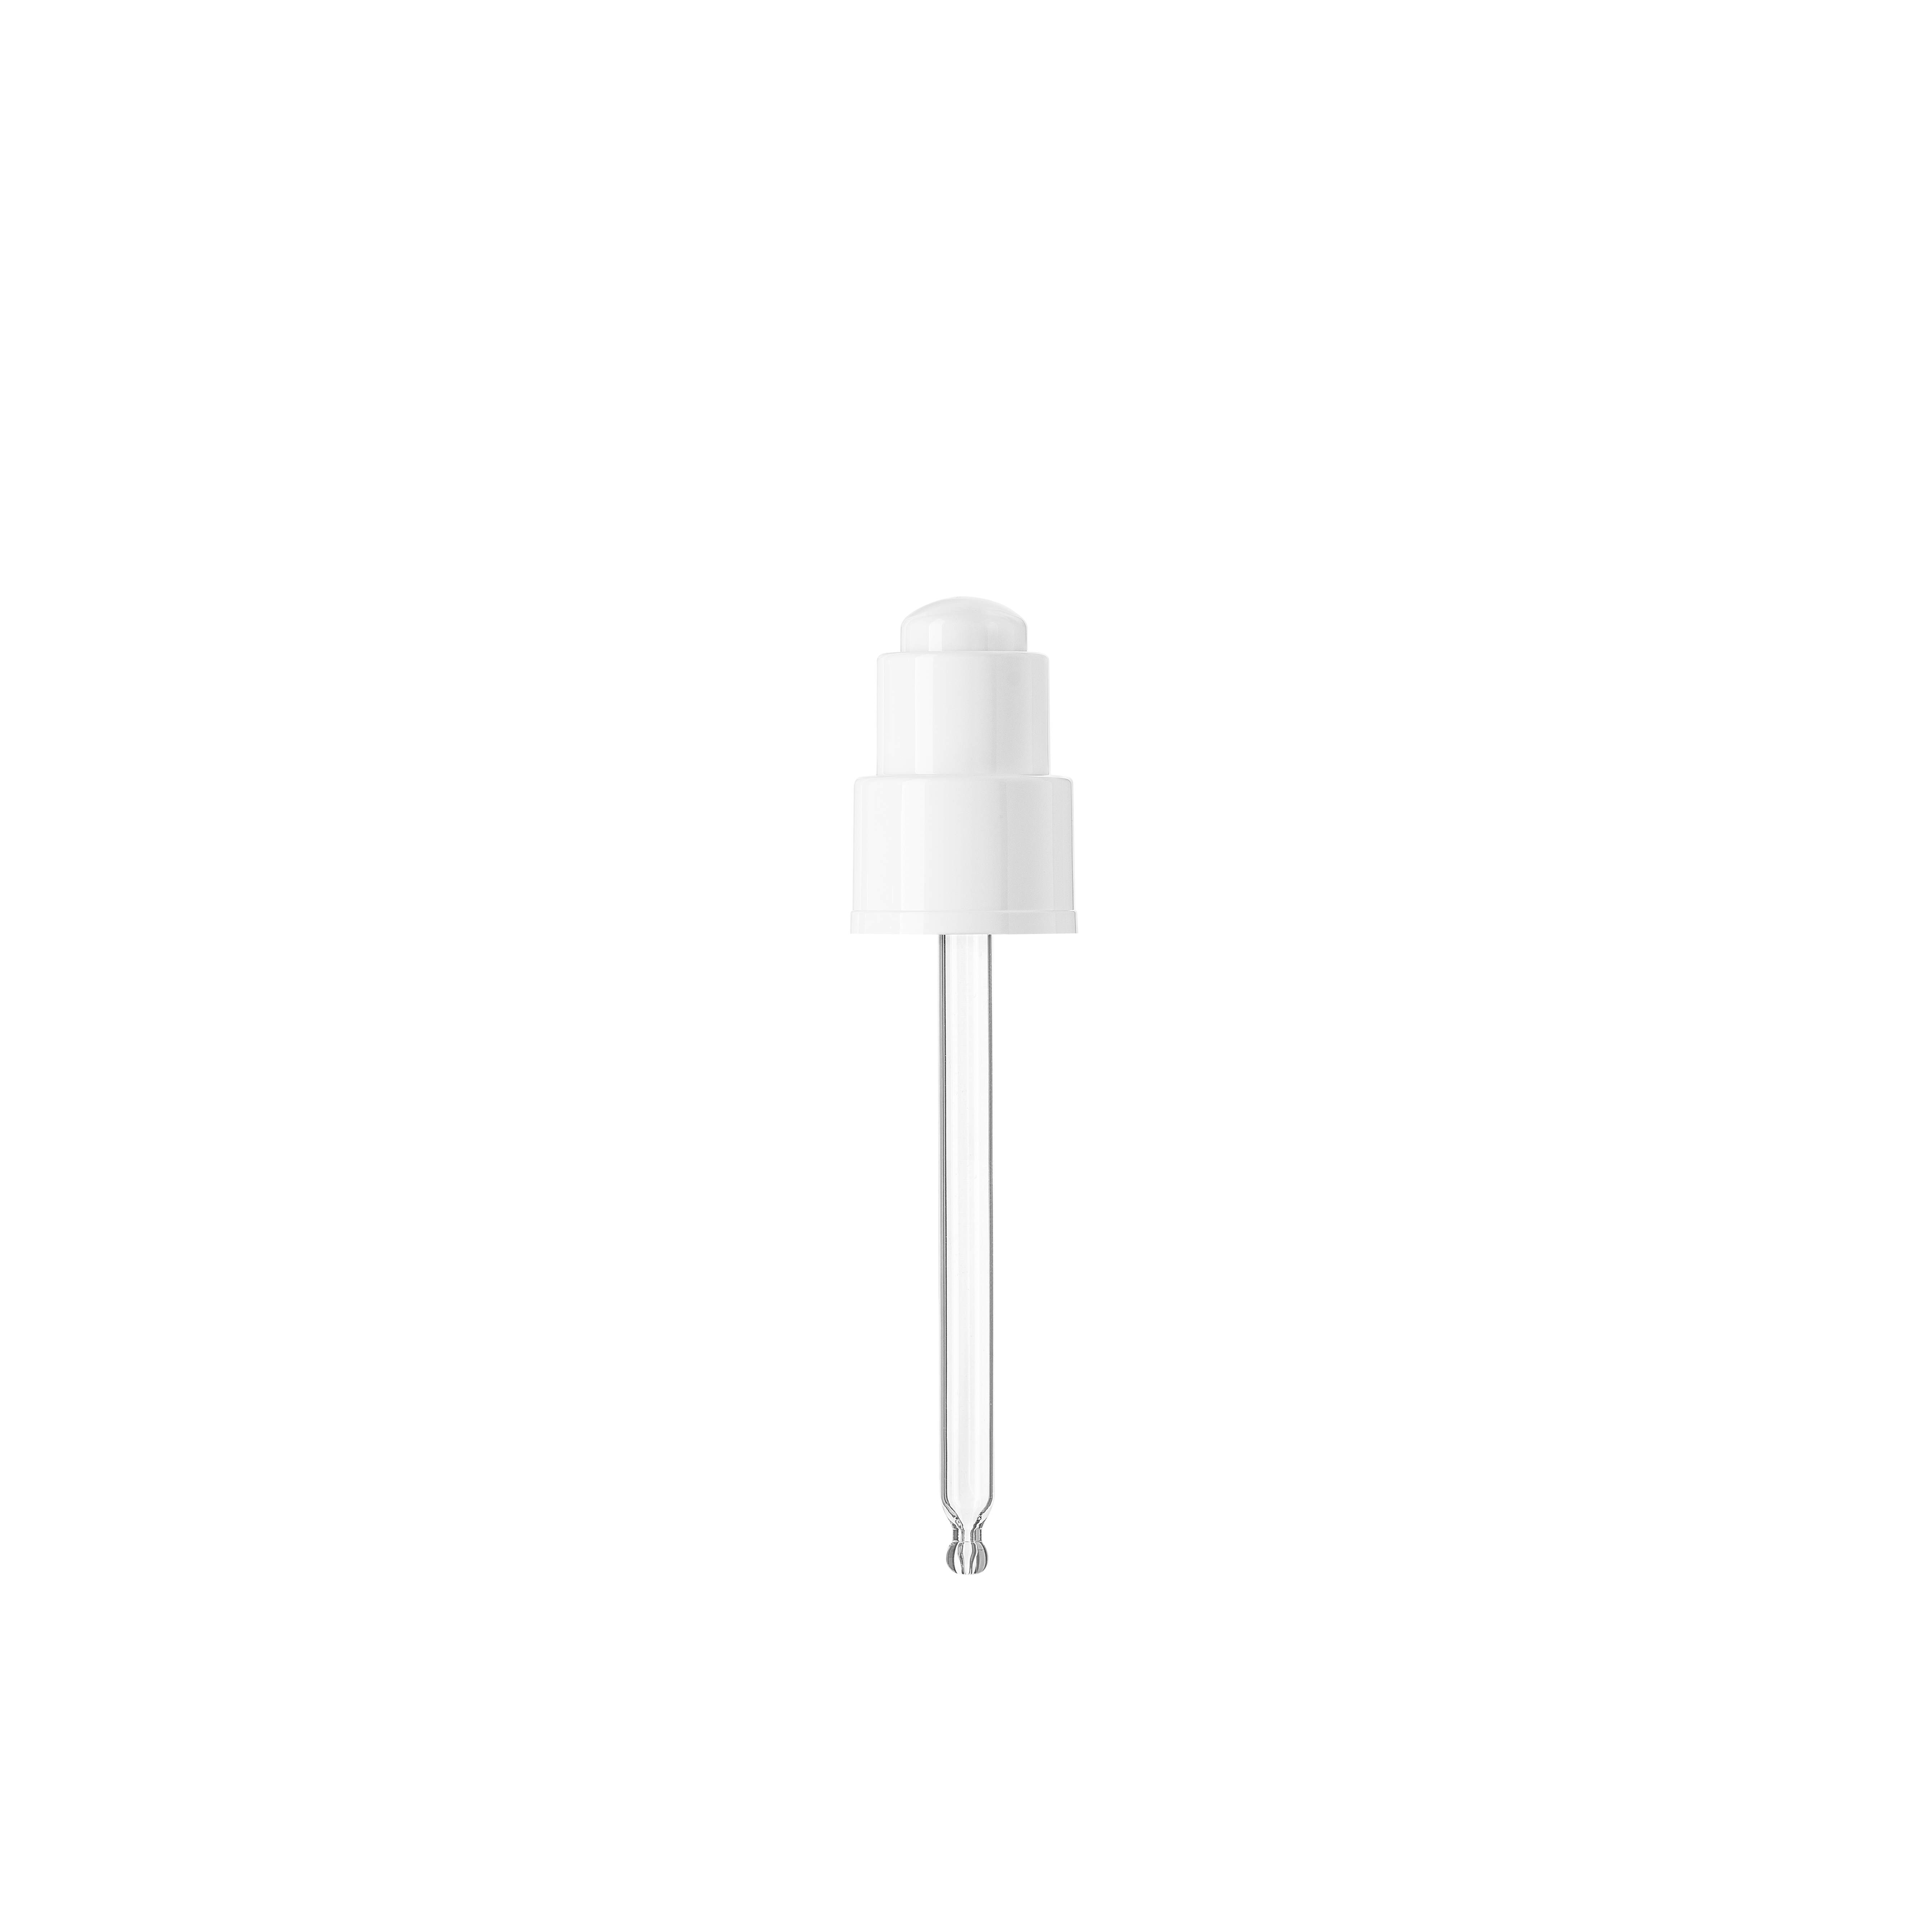 Push-button pipette 24/410, PP/ABS, white glossy finish, white button bulb Nitrile 0.4 ml, ball tip, straight for Laurel 100 ml